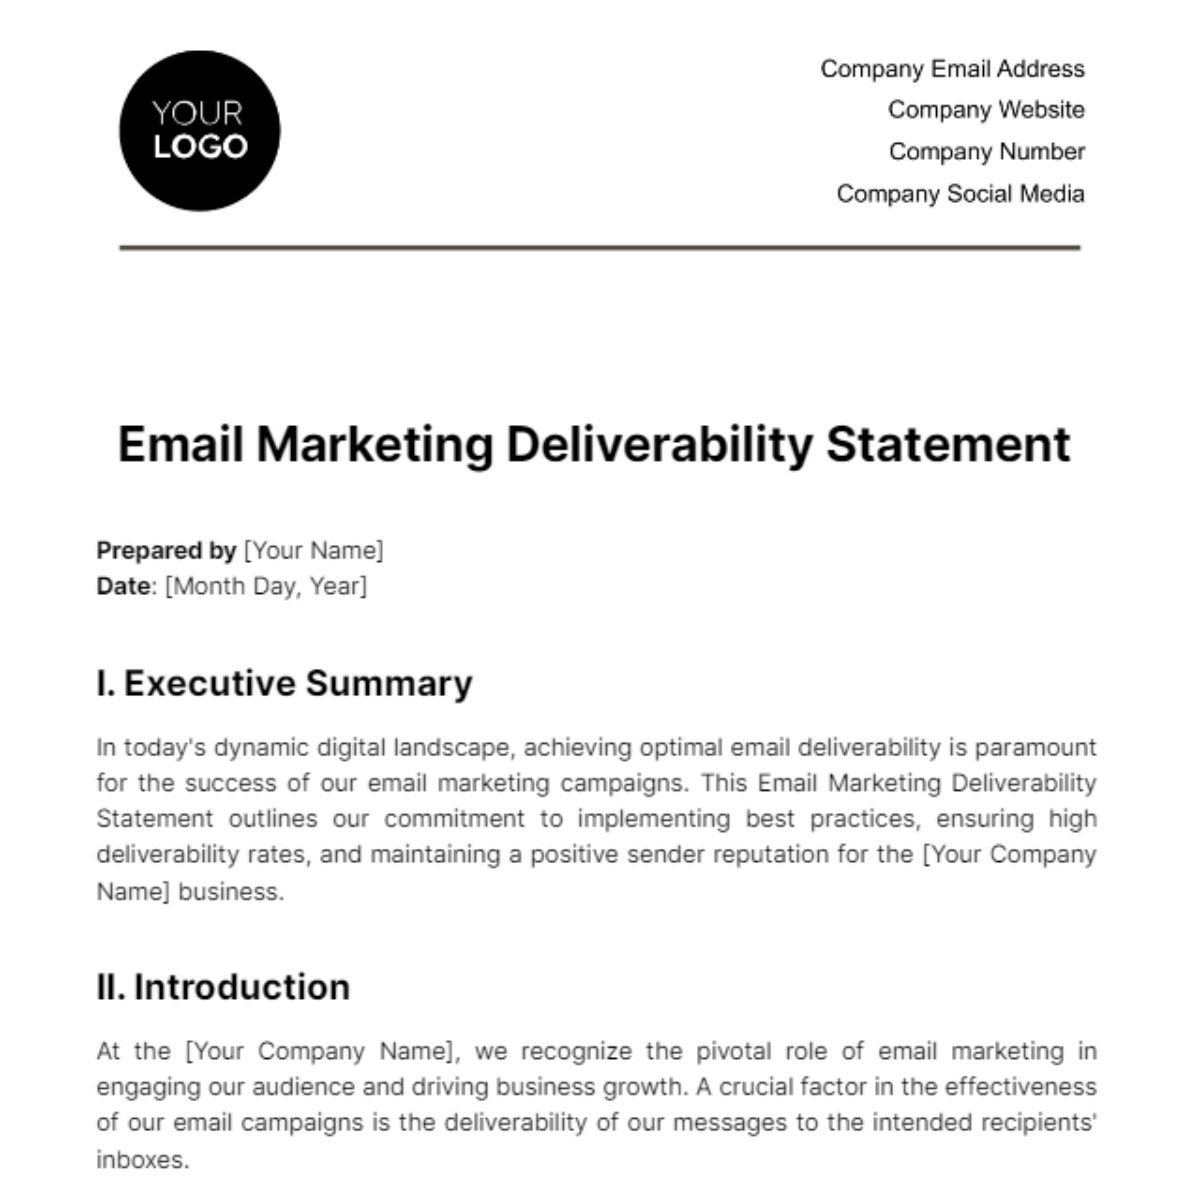 Free Email Marketing Deliverability Statement Template